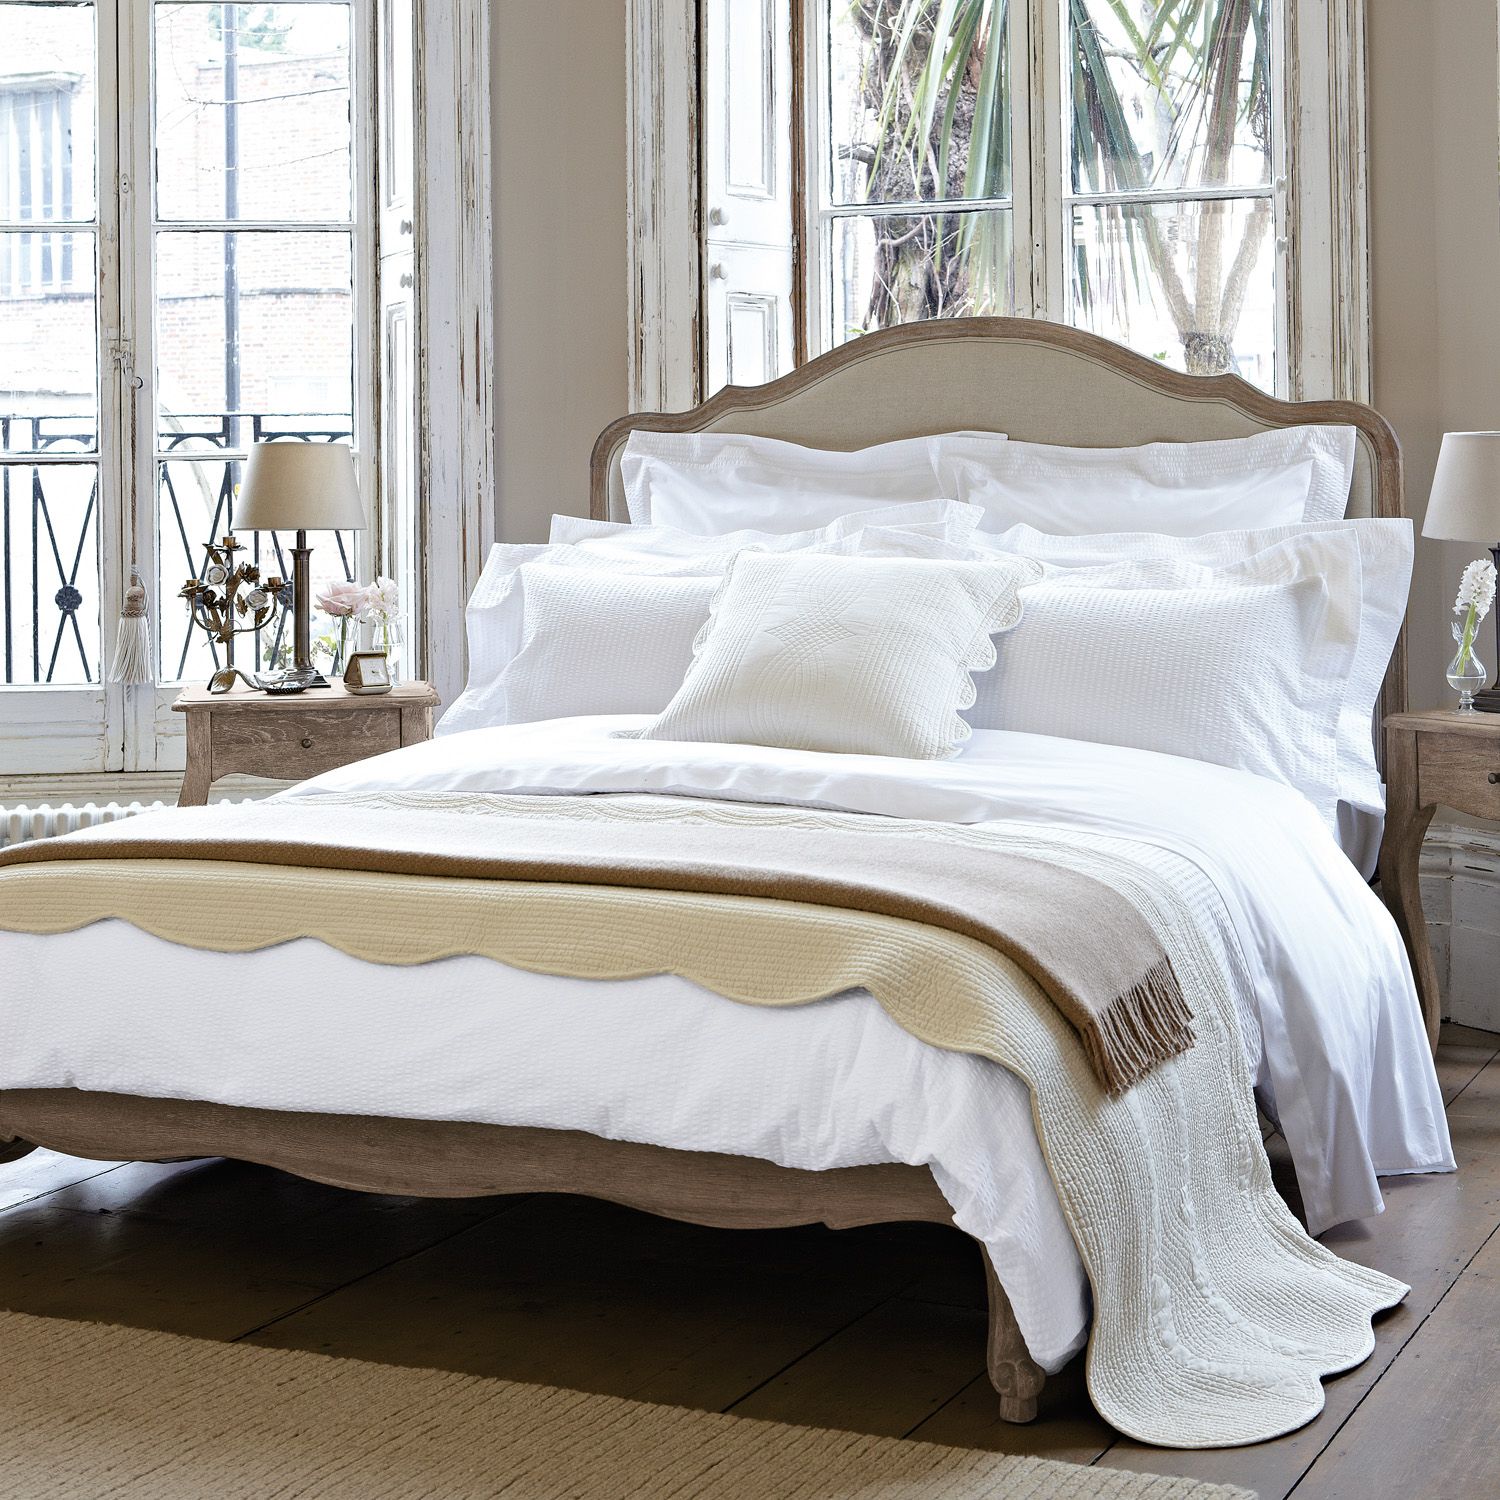 How to choose linen bedding in the UK for every season?